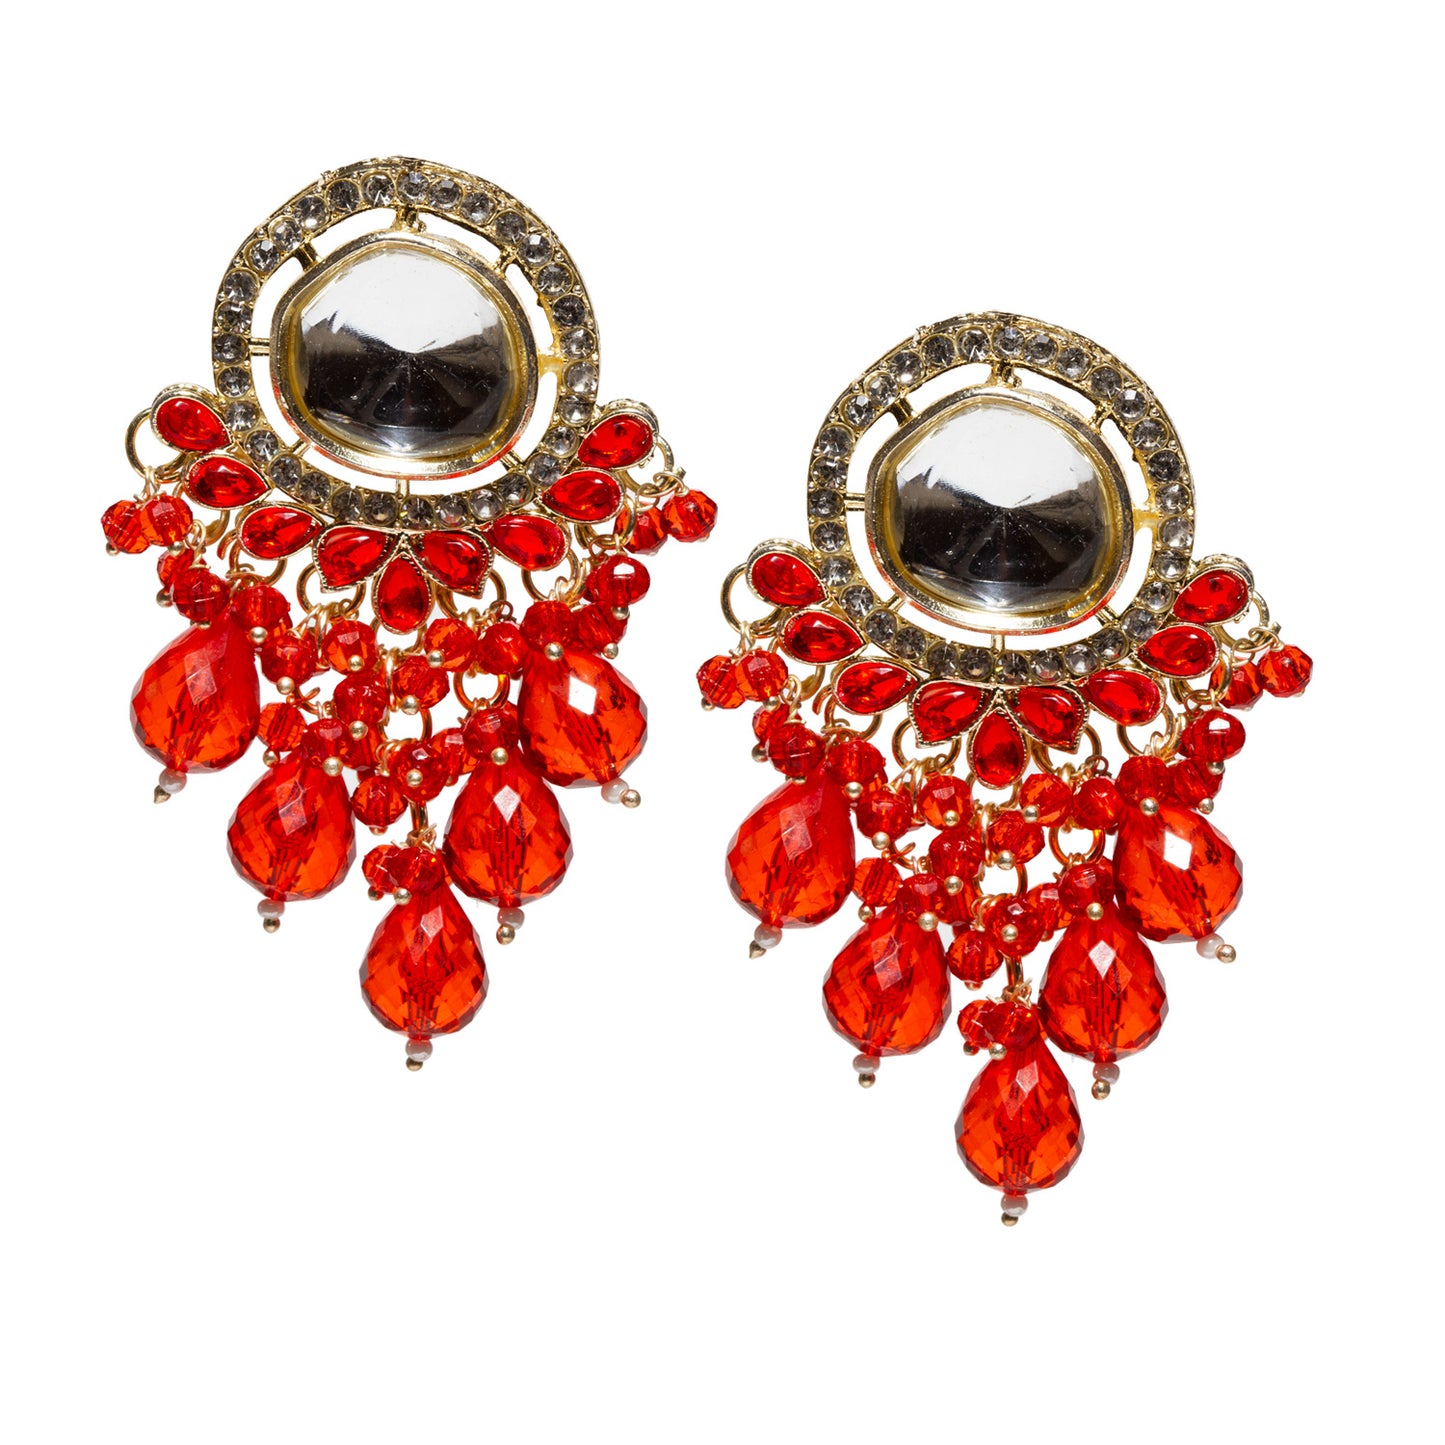 Bindhani-Gold-Plated-CZ-Stone-Red-Drop-Earrings-For-Women-and-Girls